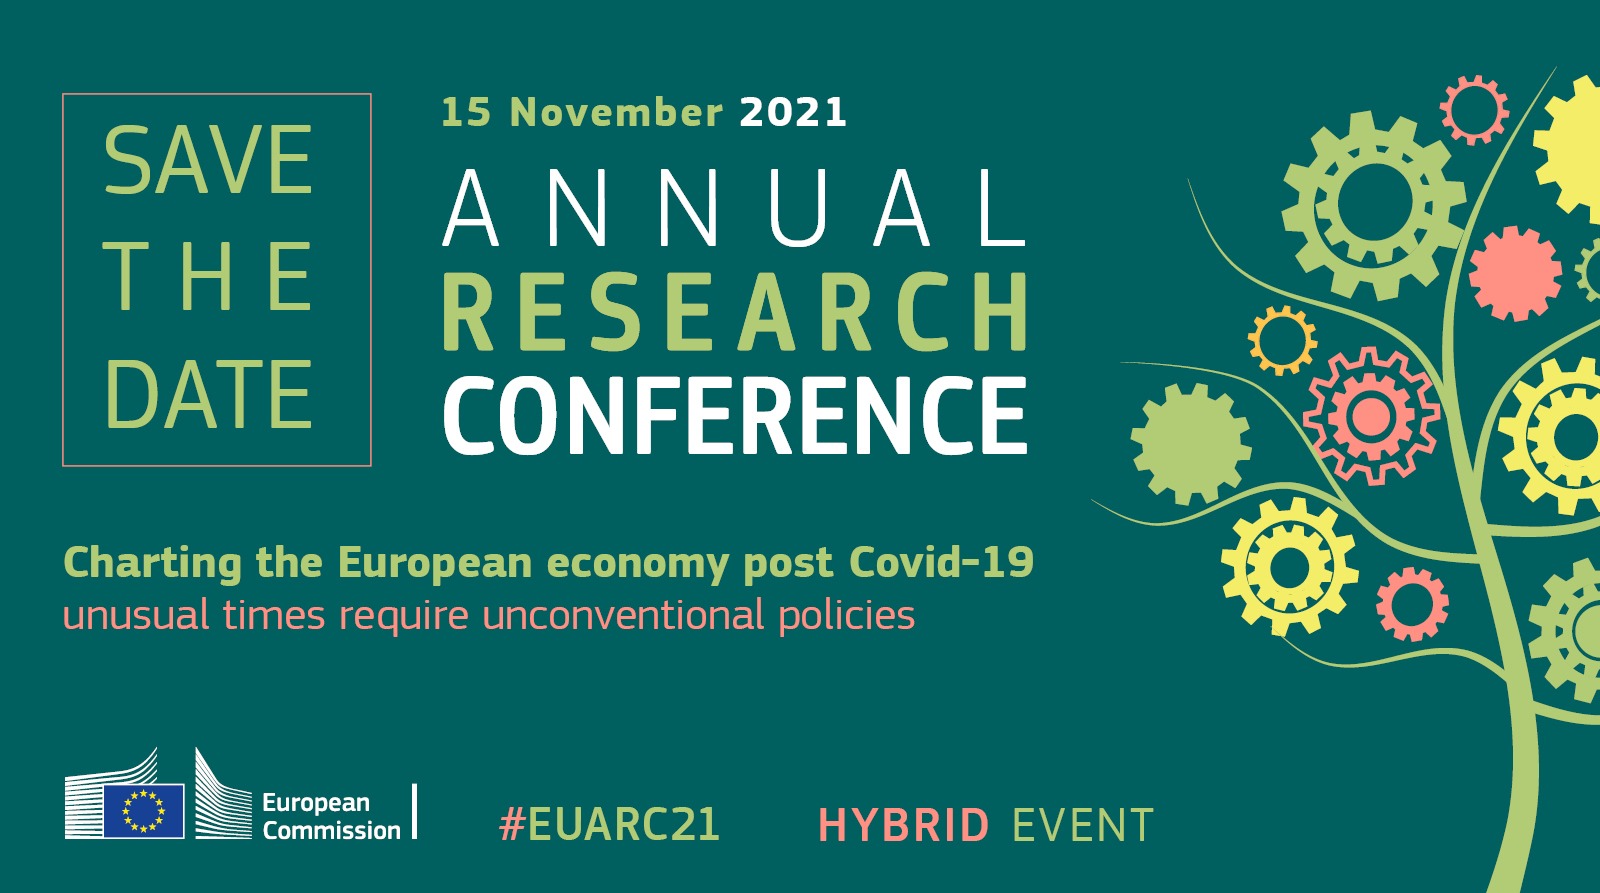 Annual Research Conference 2021: Charting the European economy post COVID-19